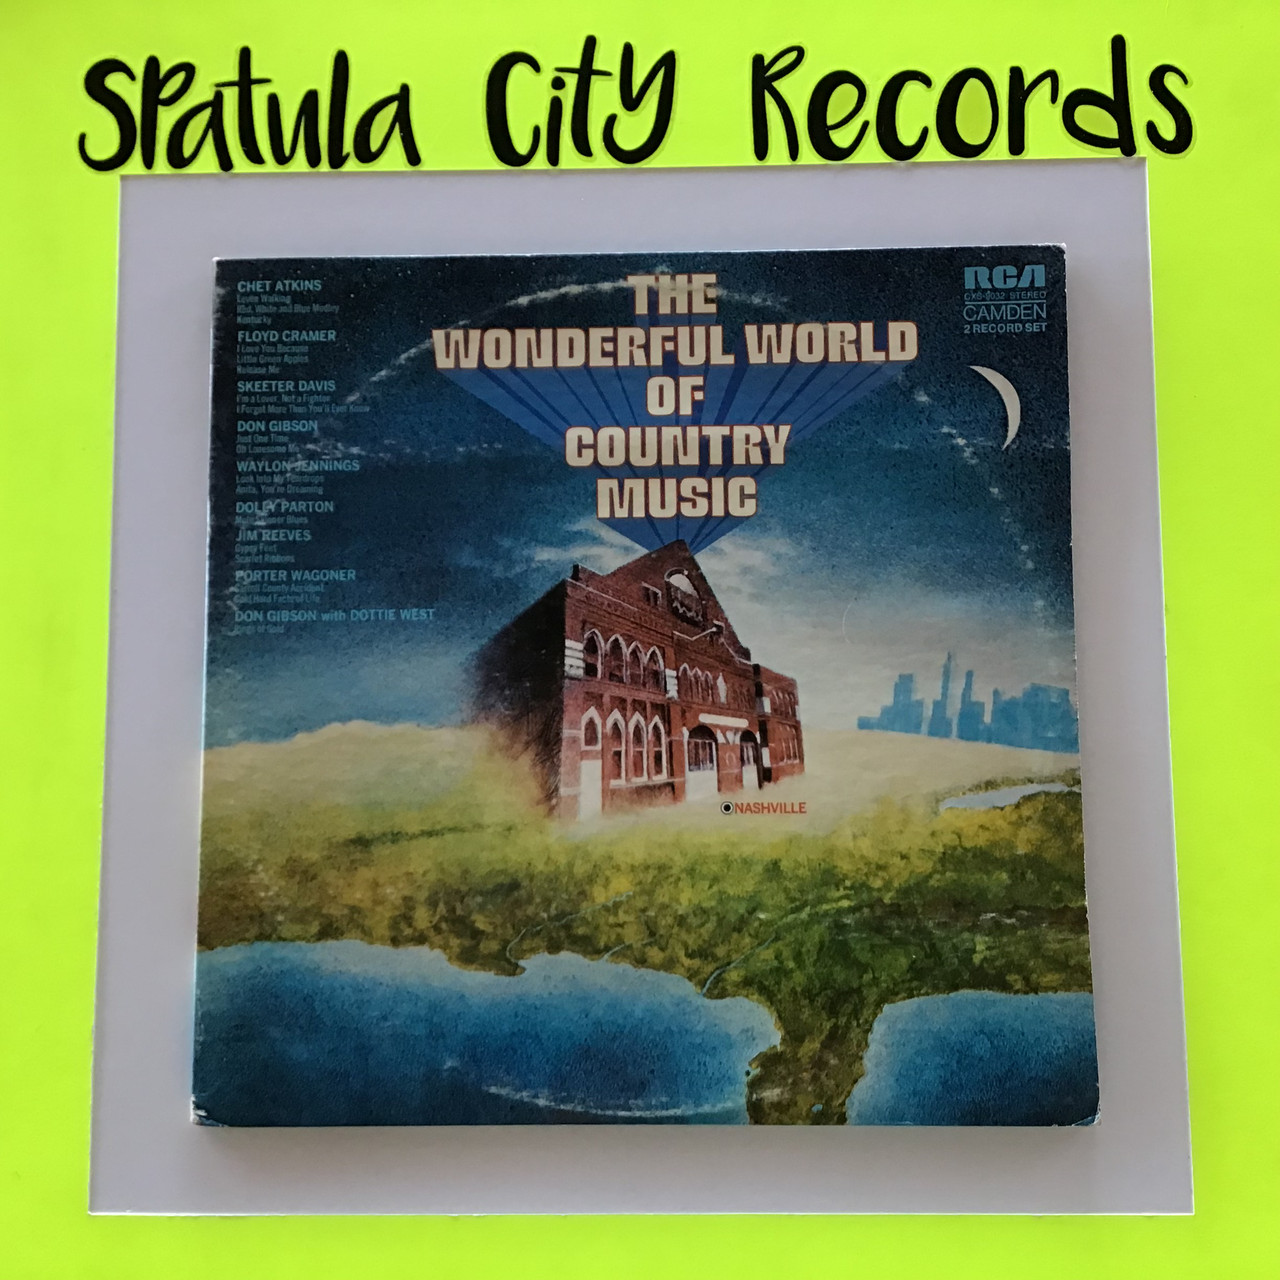 Wonderful World of Country Music, The - compilation - double vinyl record LP